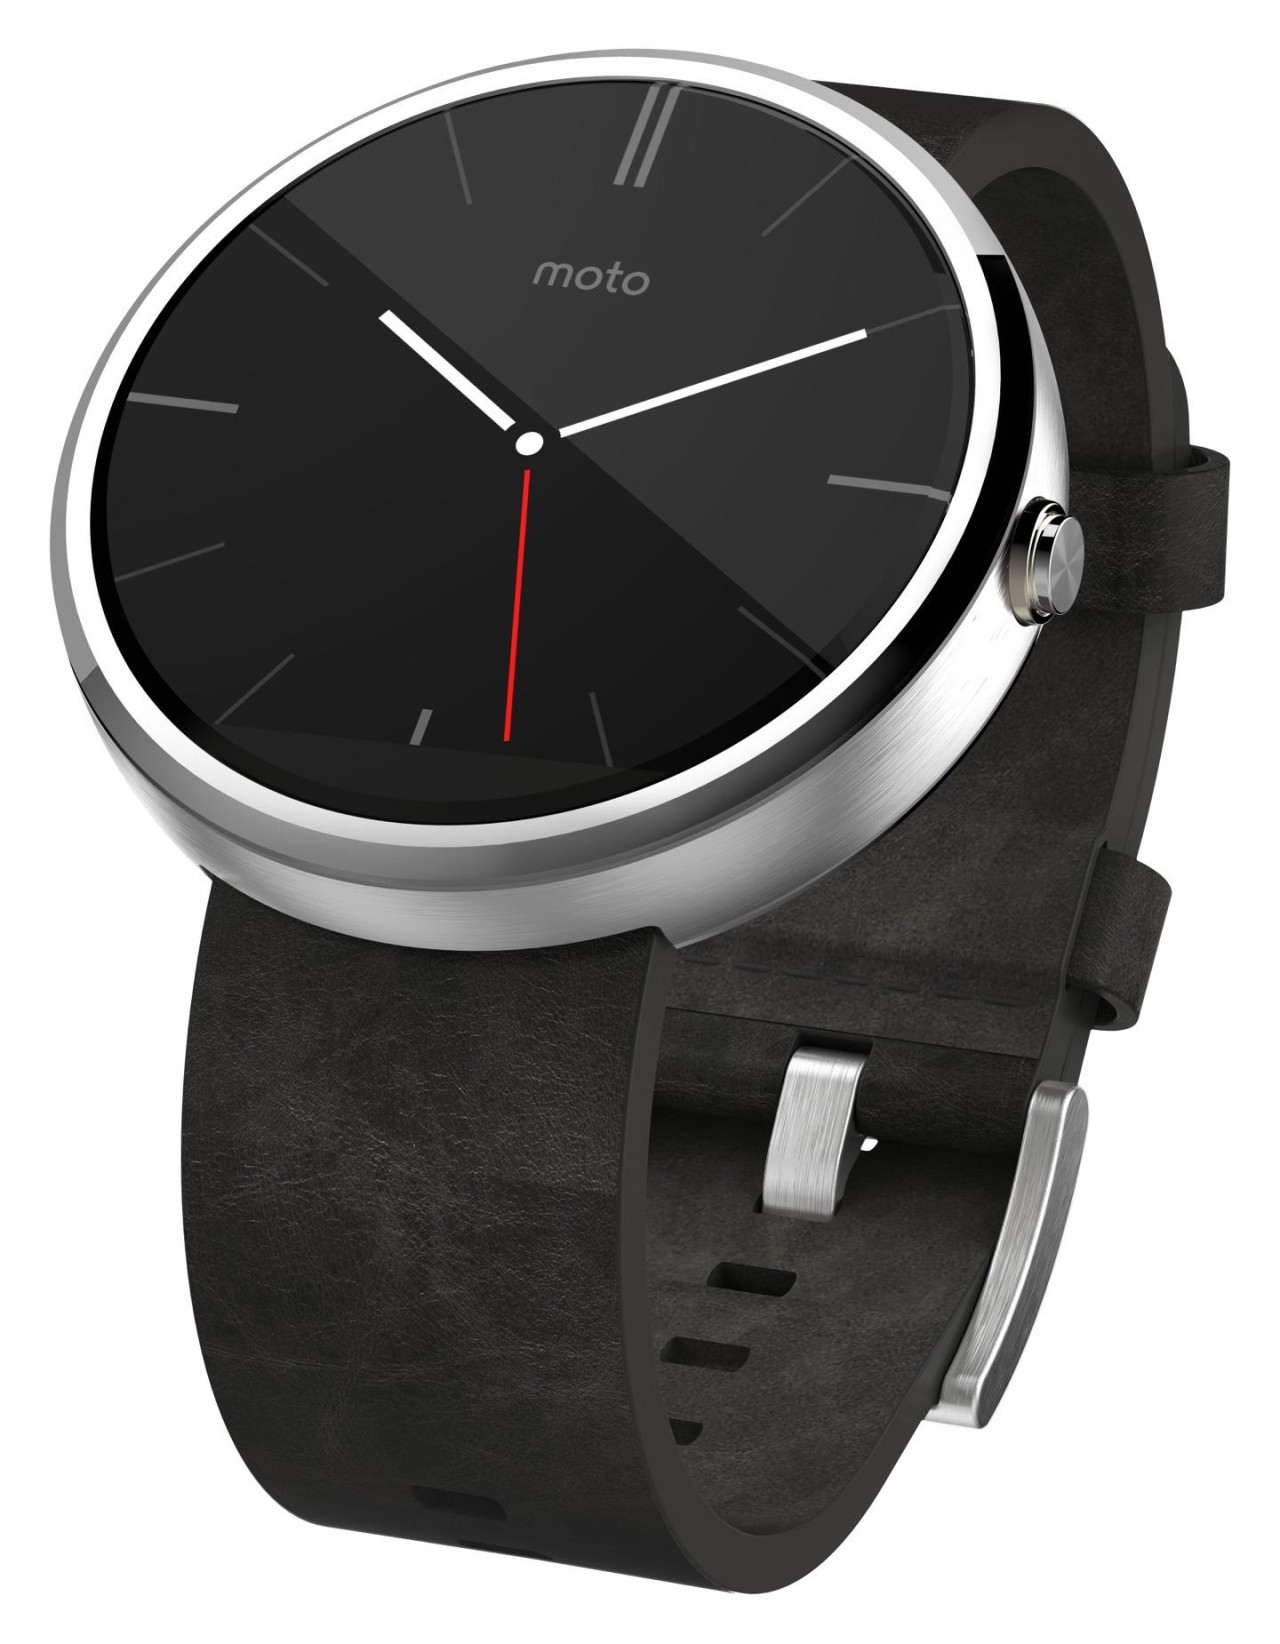 Moto 360 Press Images 4 1280x1644 - The Moto 360 is now available for $250